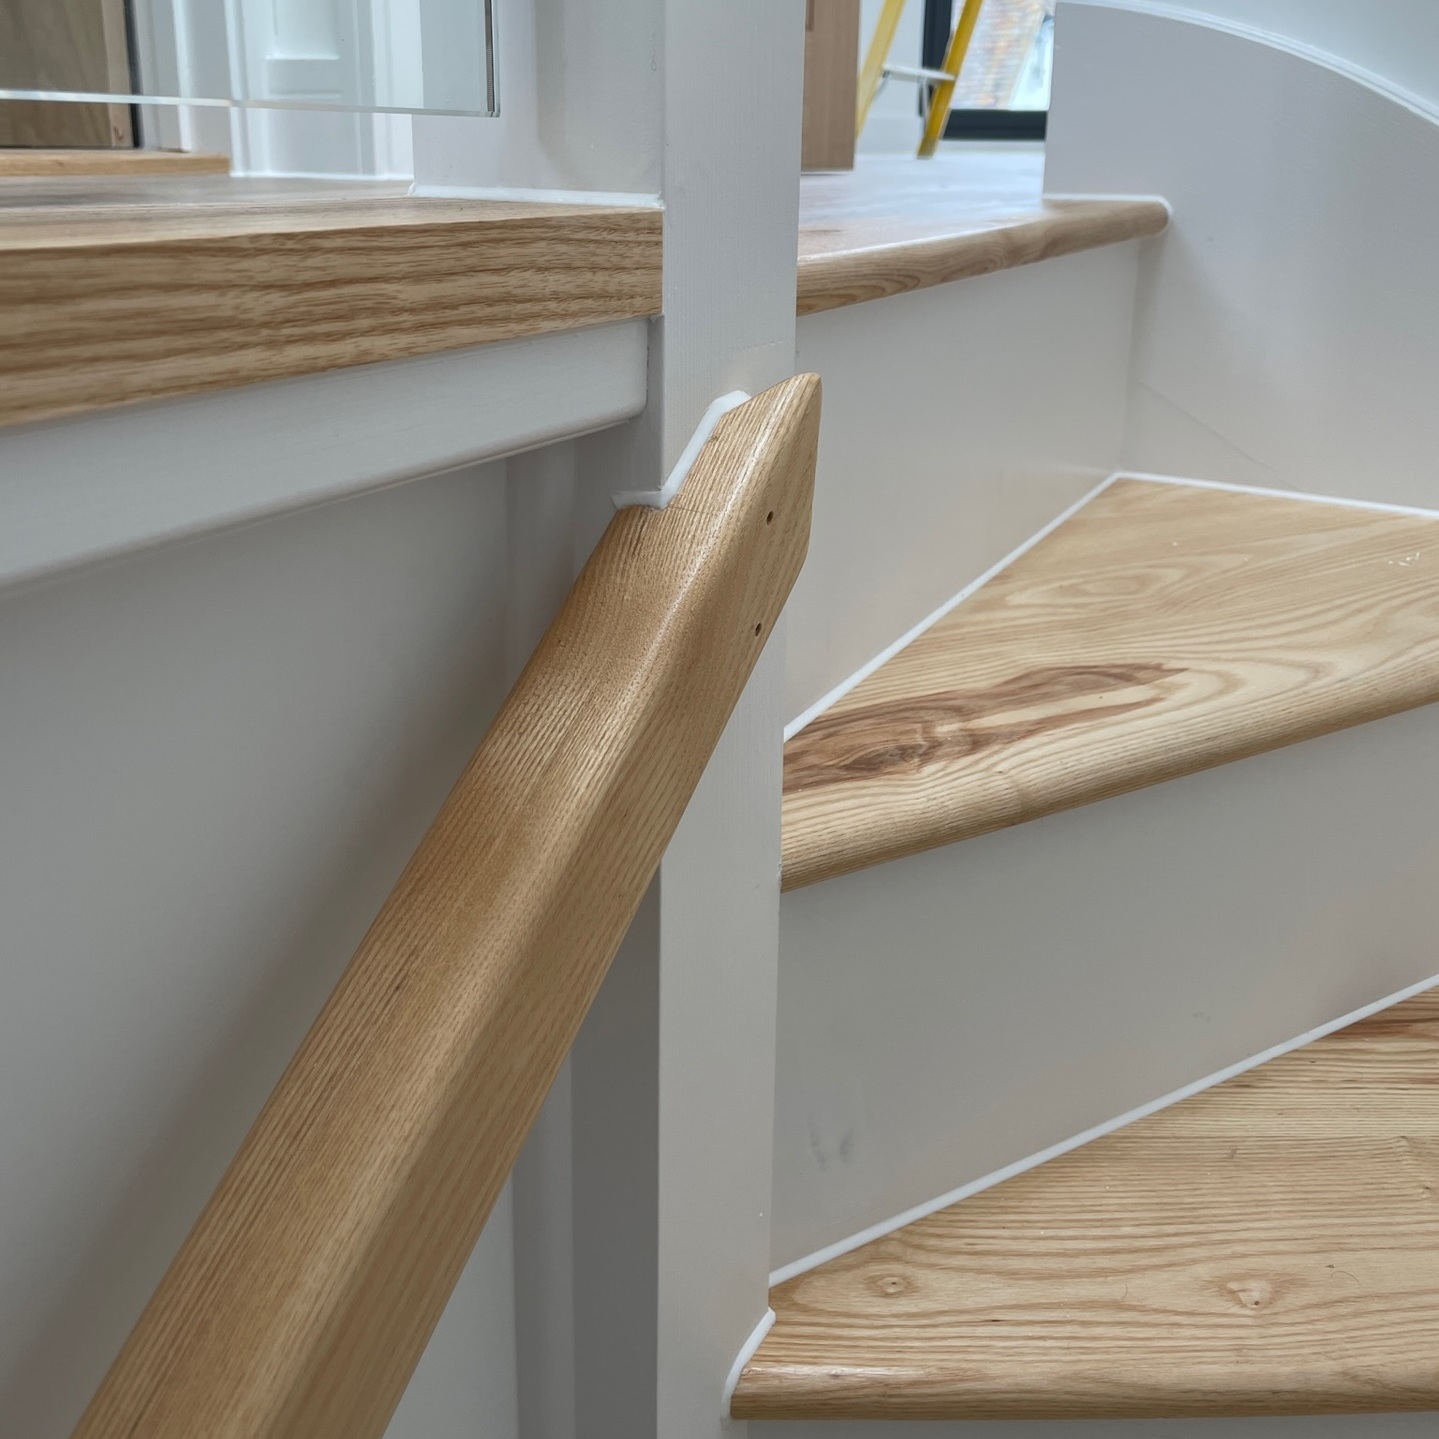 white silicone applied to stair joins and hand rail